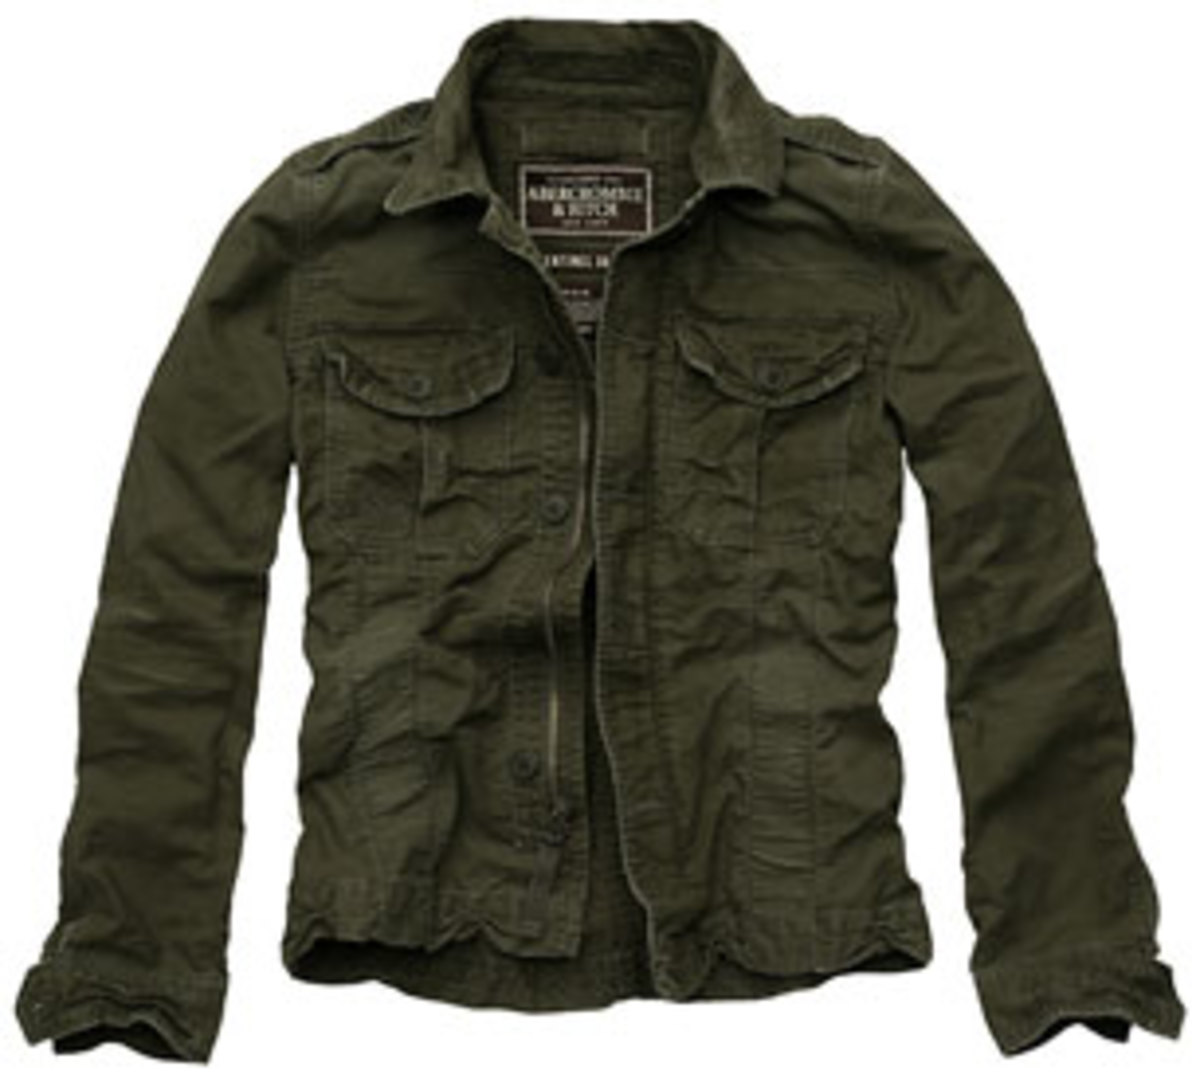 sentinel jacket abercrombie fitch